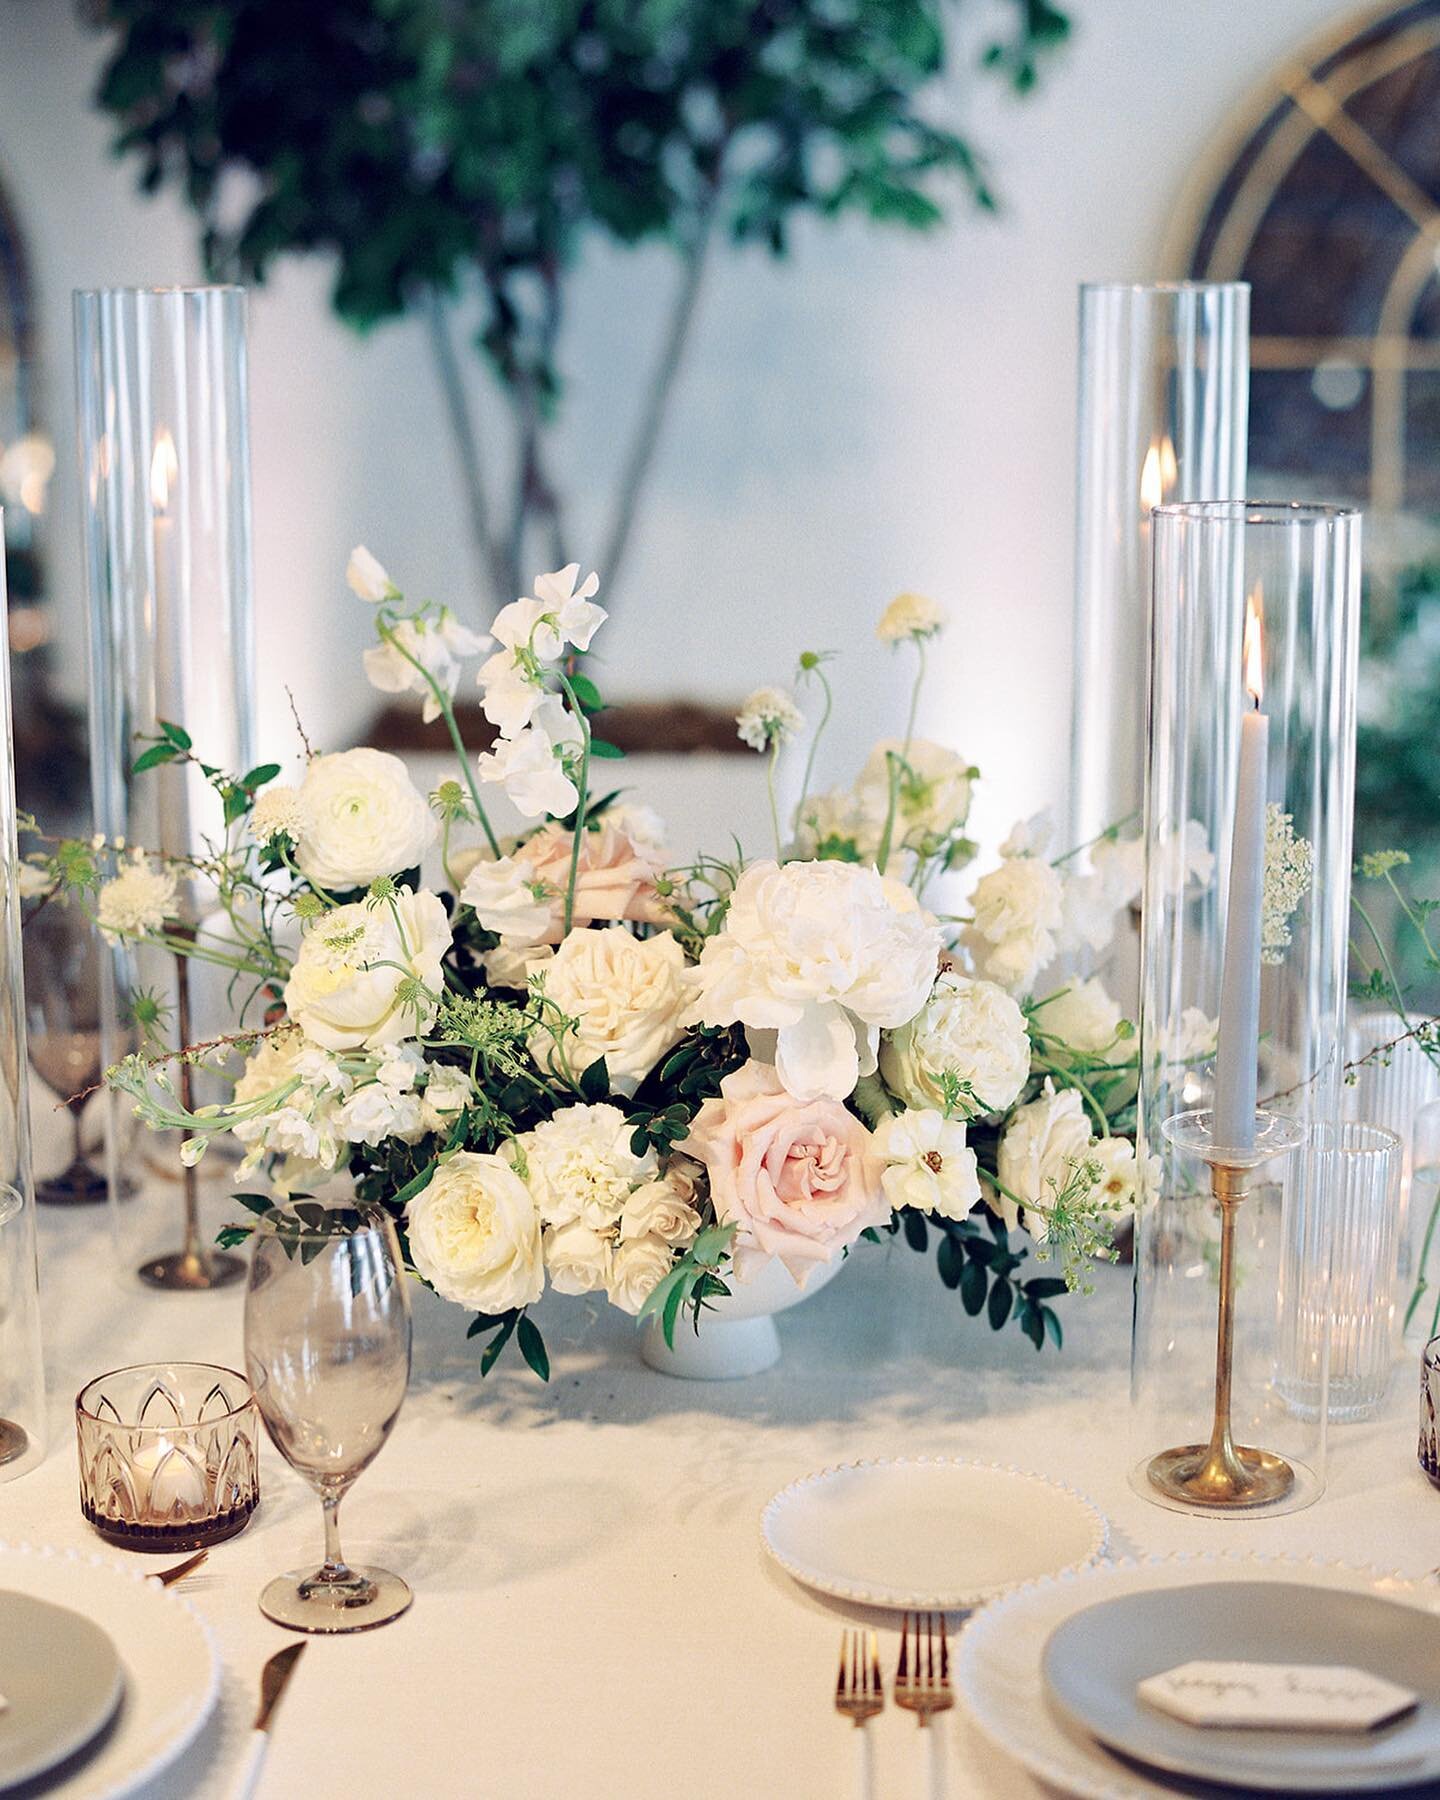 Show stopping sweet peas and killer candles from @featherandoaktn. Best recipe for a beautiful head table. ✨

Photographer: @rachel.fugate 
Planner: @devonleigh_events 
Florals: @maryloverichardson 
Candles: @featherandoaktn 
Venue: @thesaintelle 
 
